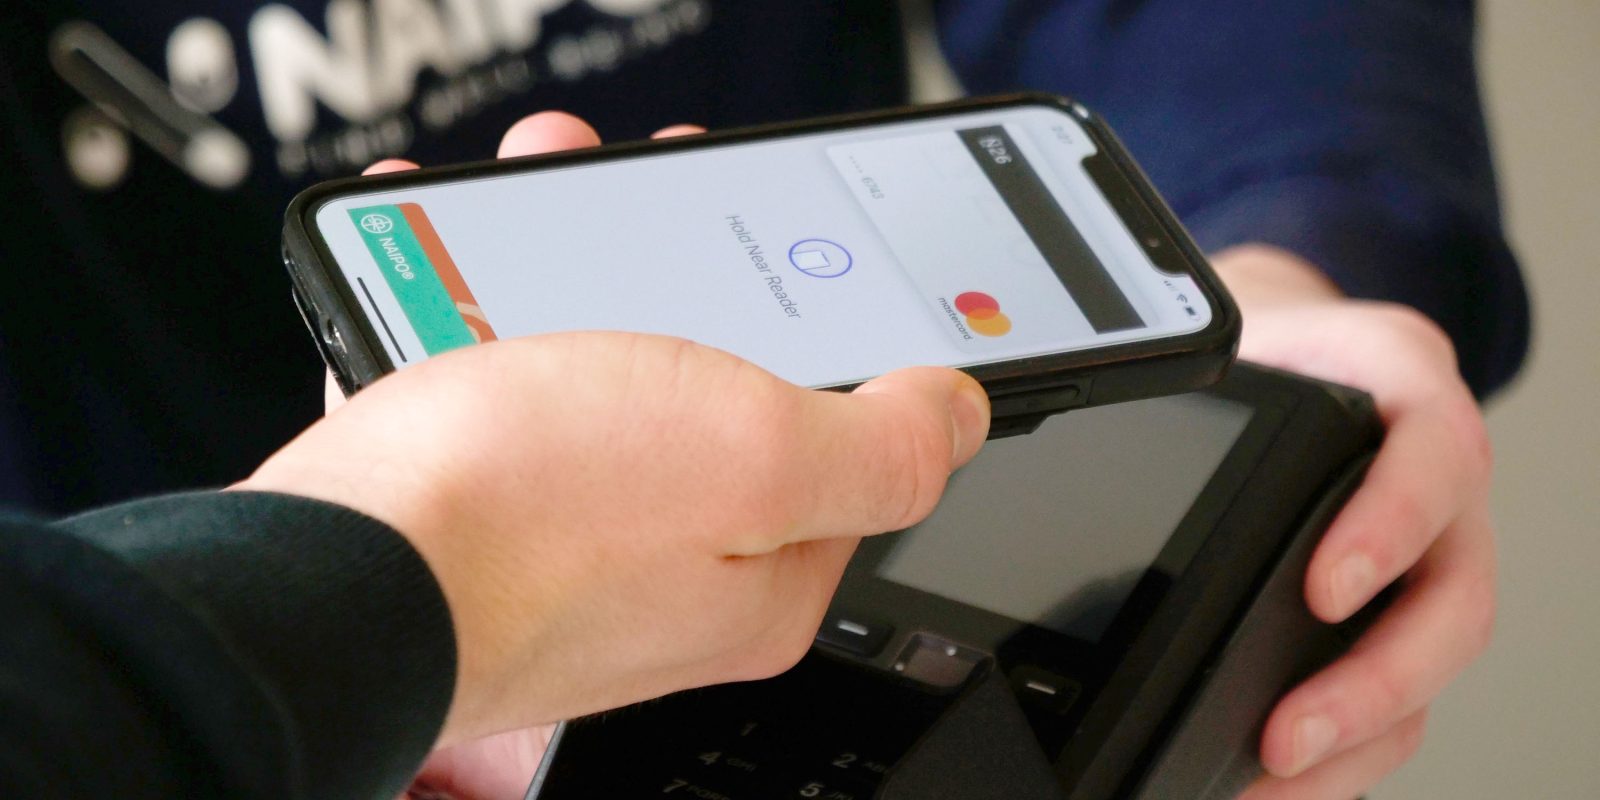 Apple Pay competitors could include EU